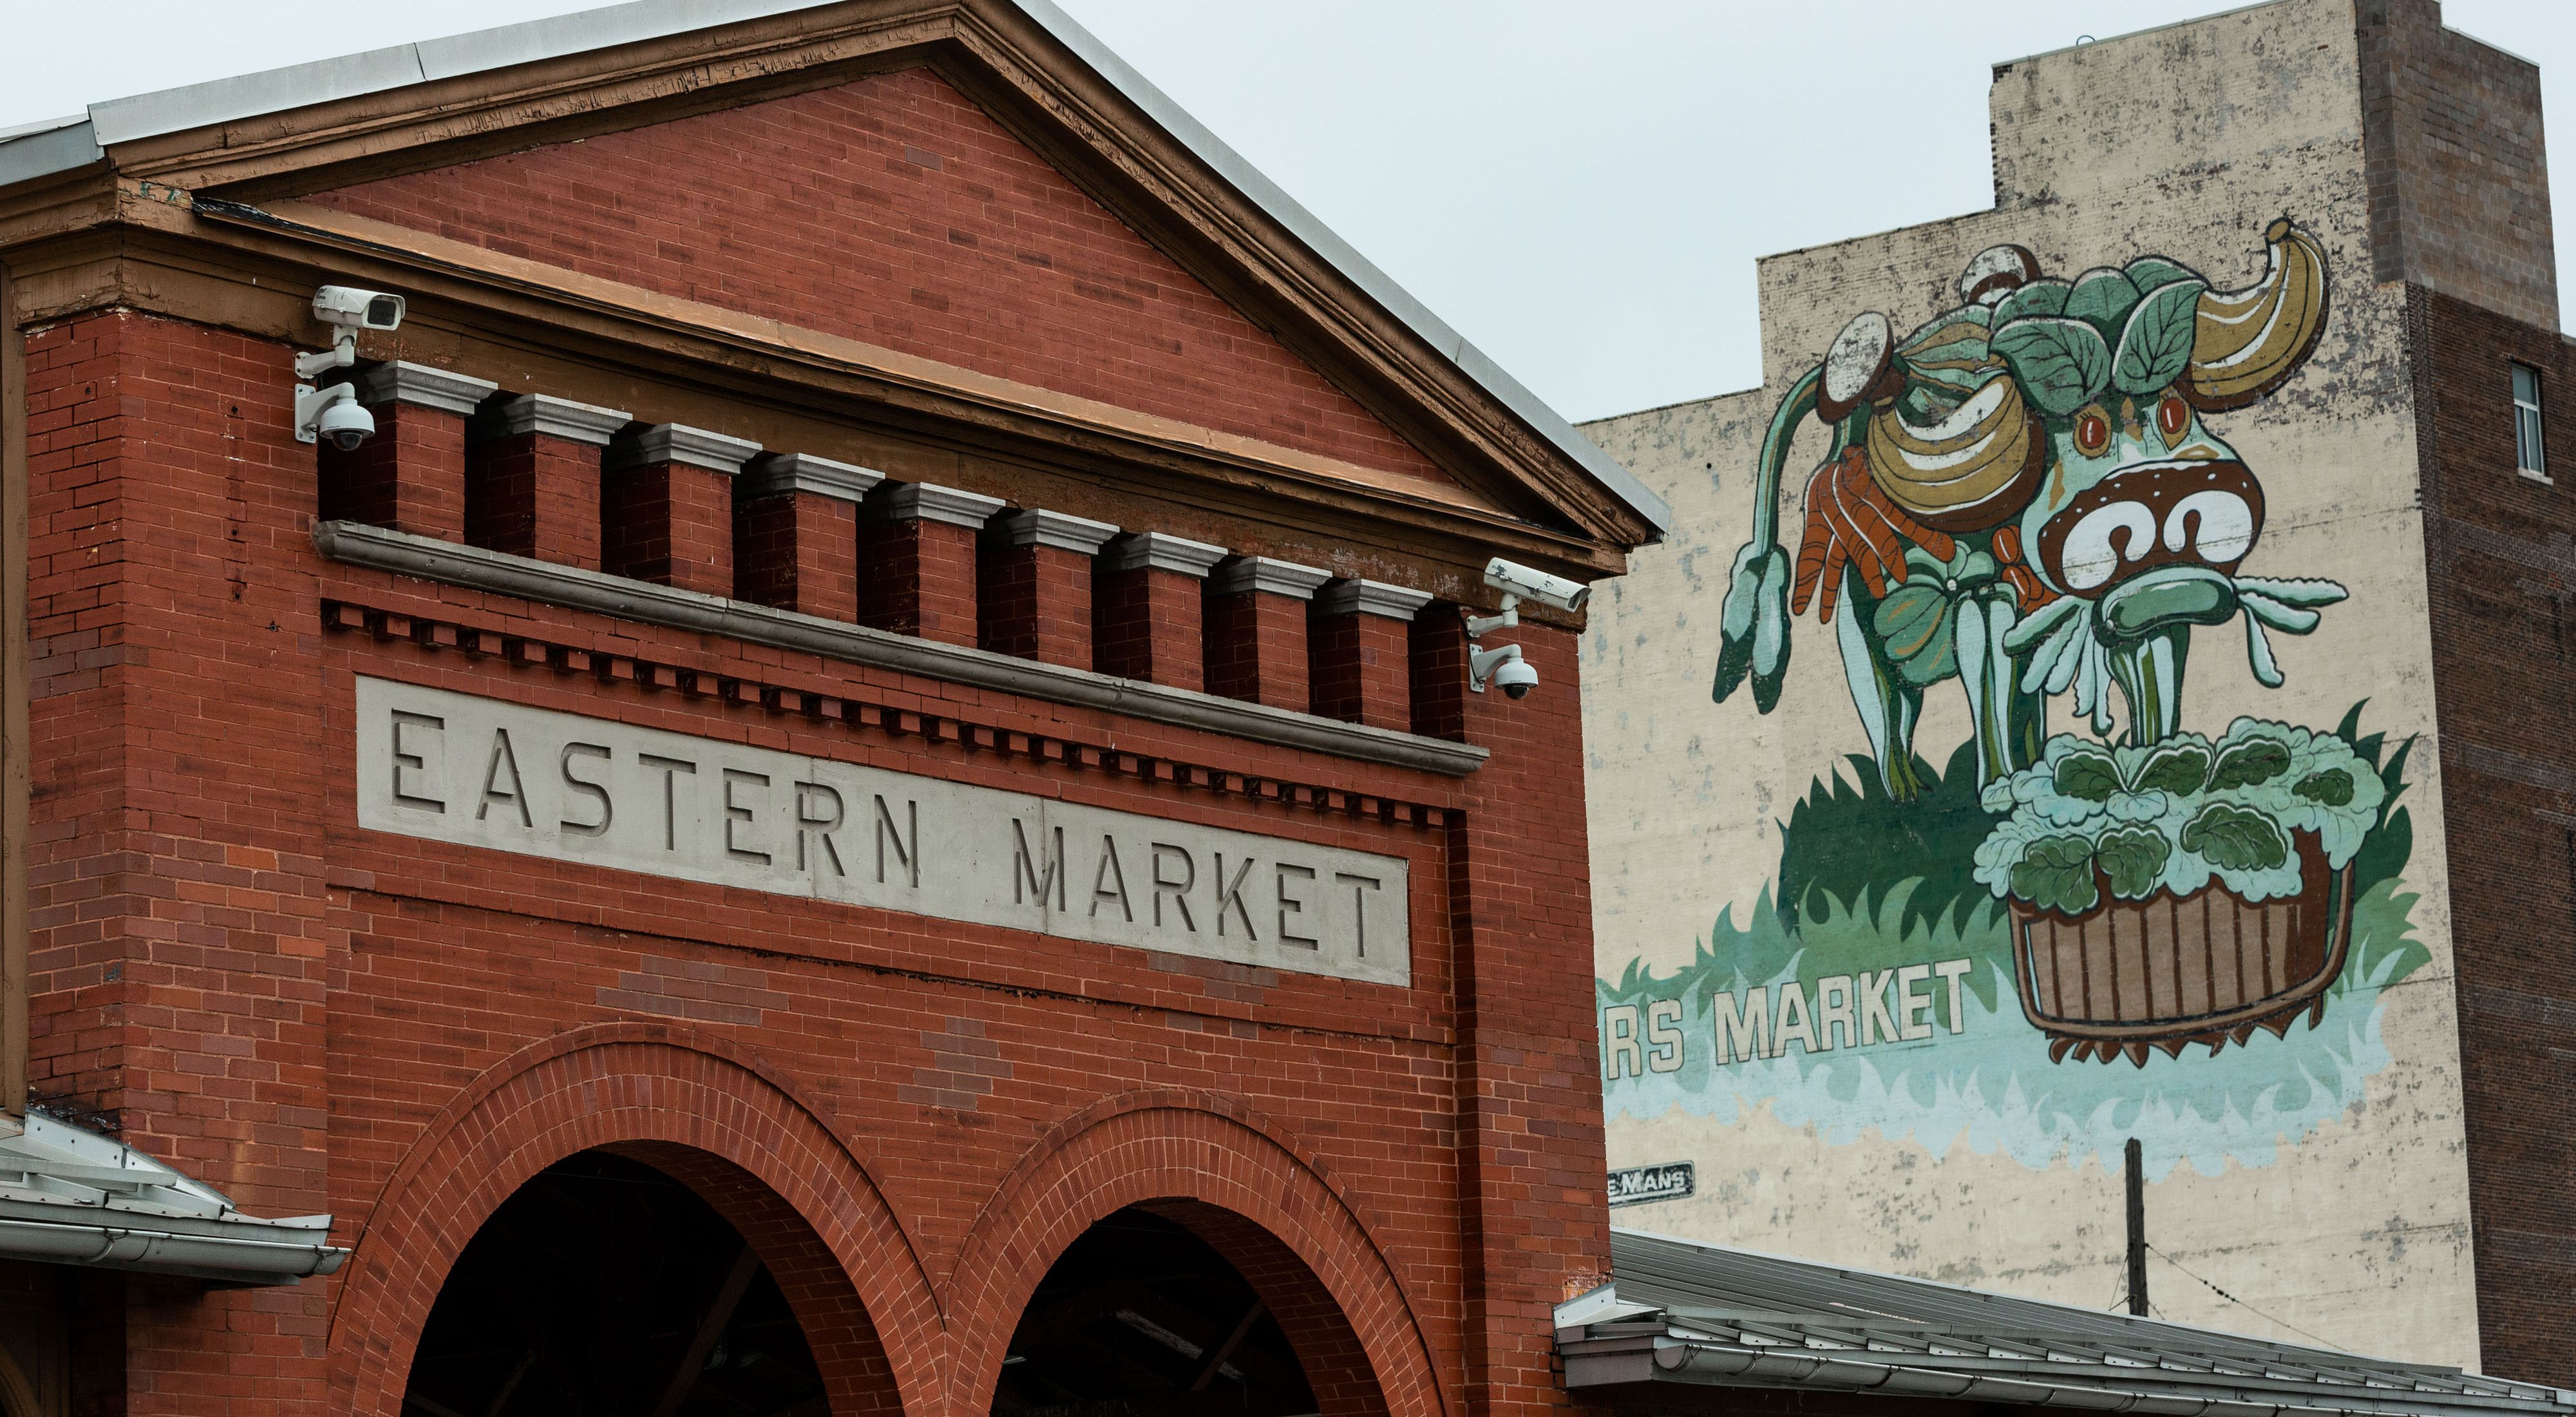 Red brick building for Eastern Market next to building with mural.